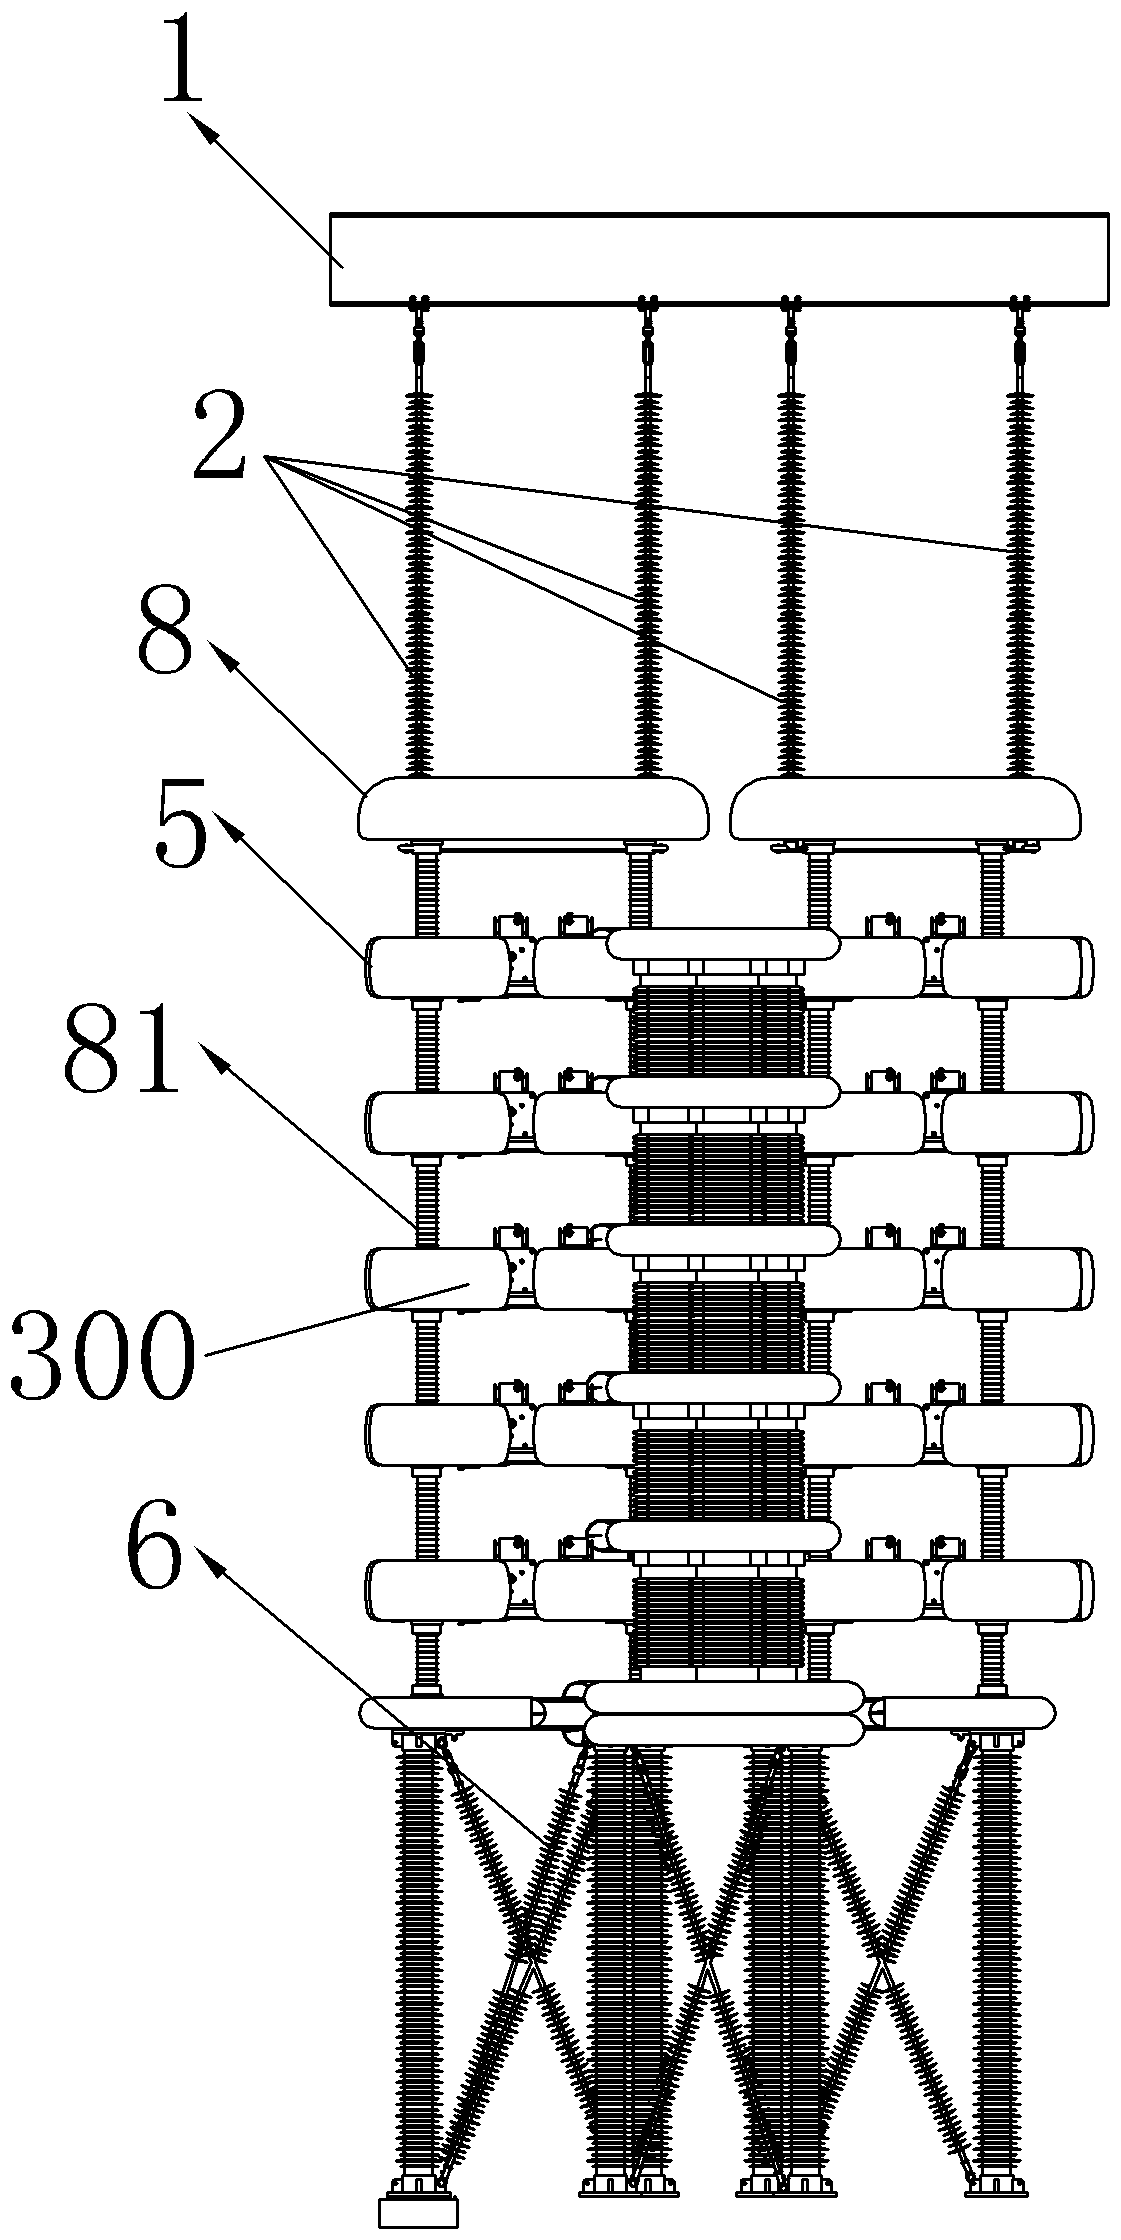 A high-voltage DC circuit breaker valve tower structure